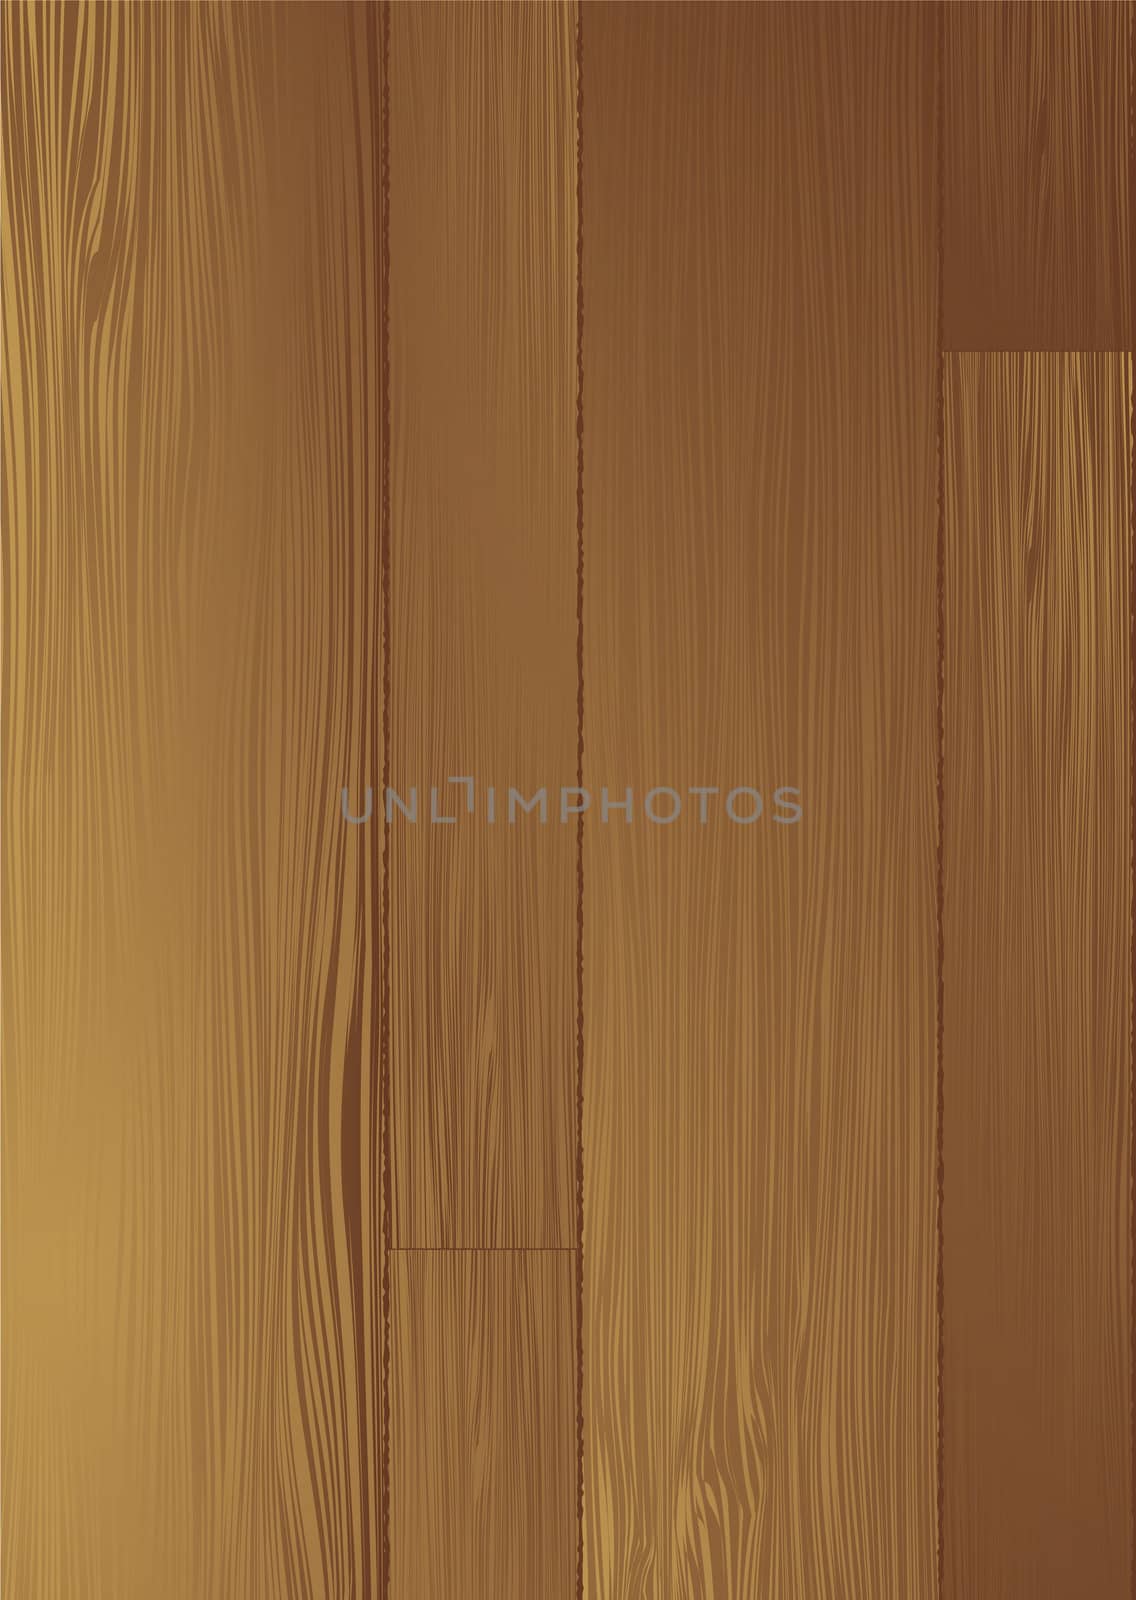 Illustrated wood grain background with planks and joints